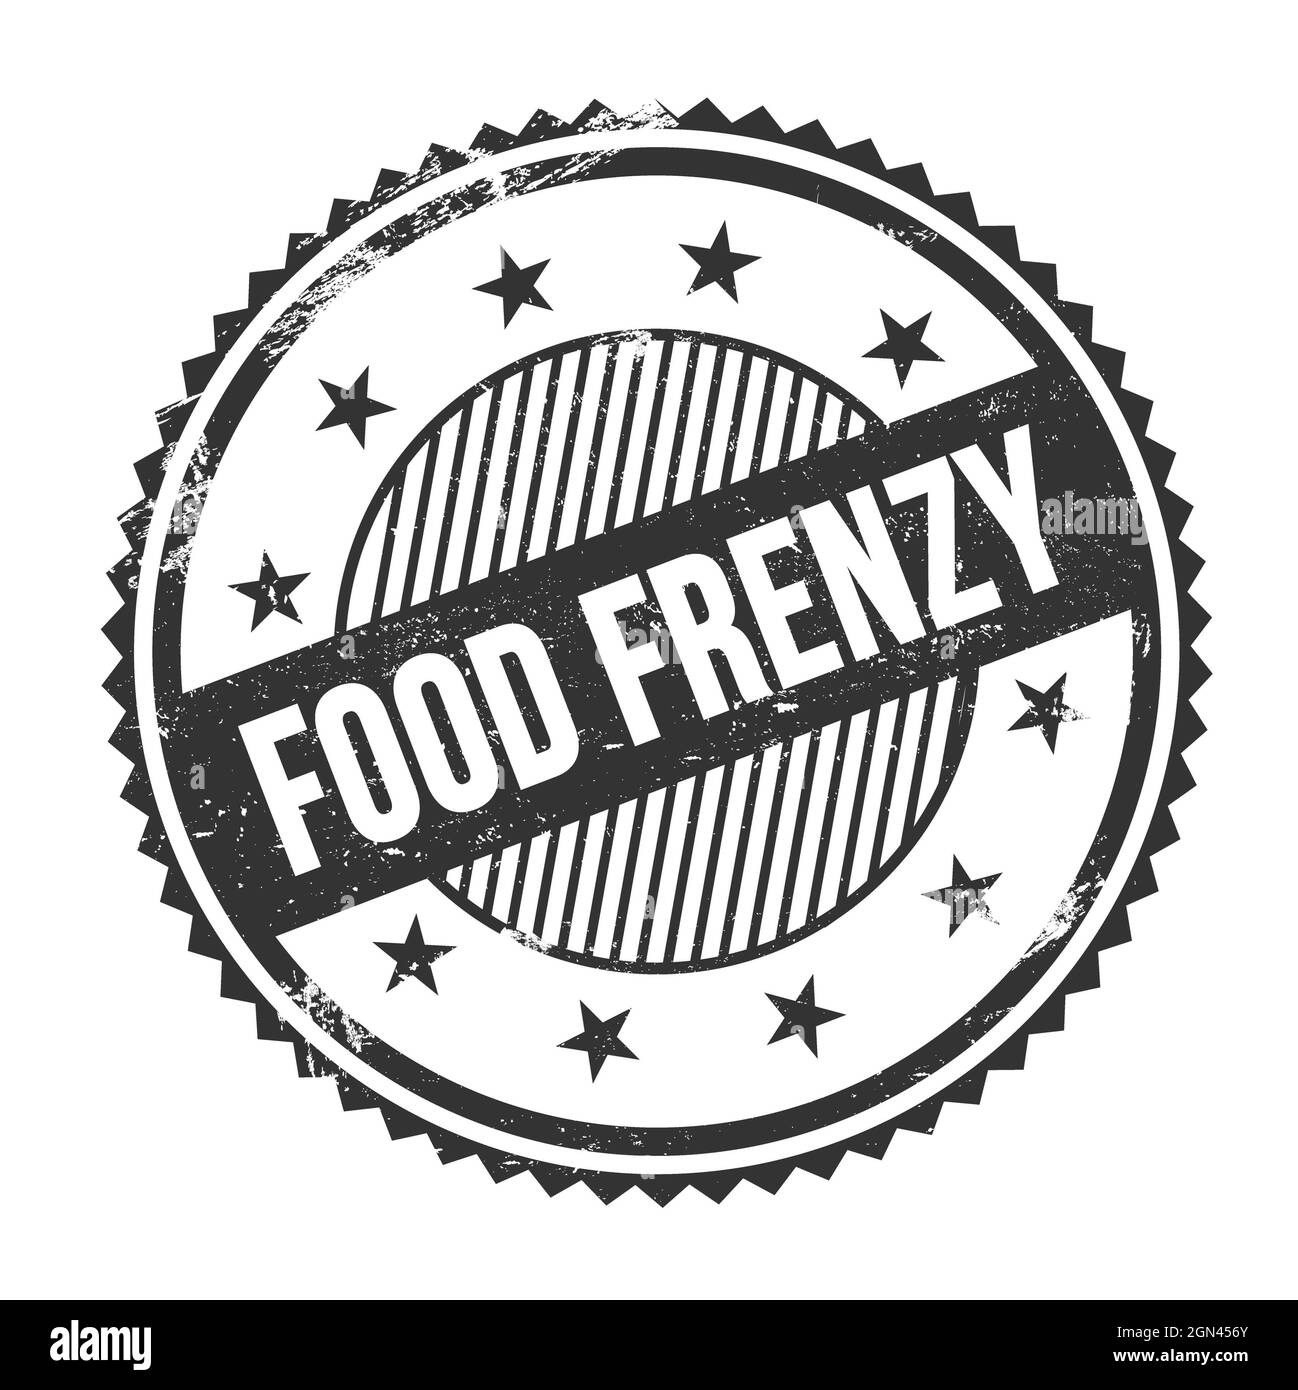 FOOD FRENZY text written on black grungy zig zag borders round stamp. Stock Photo